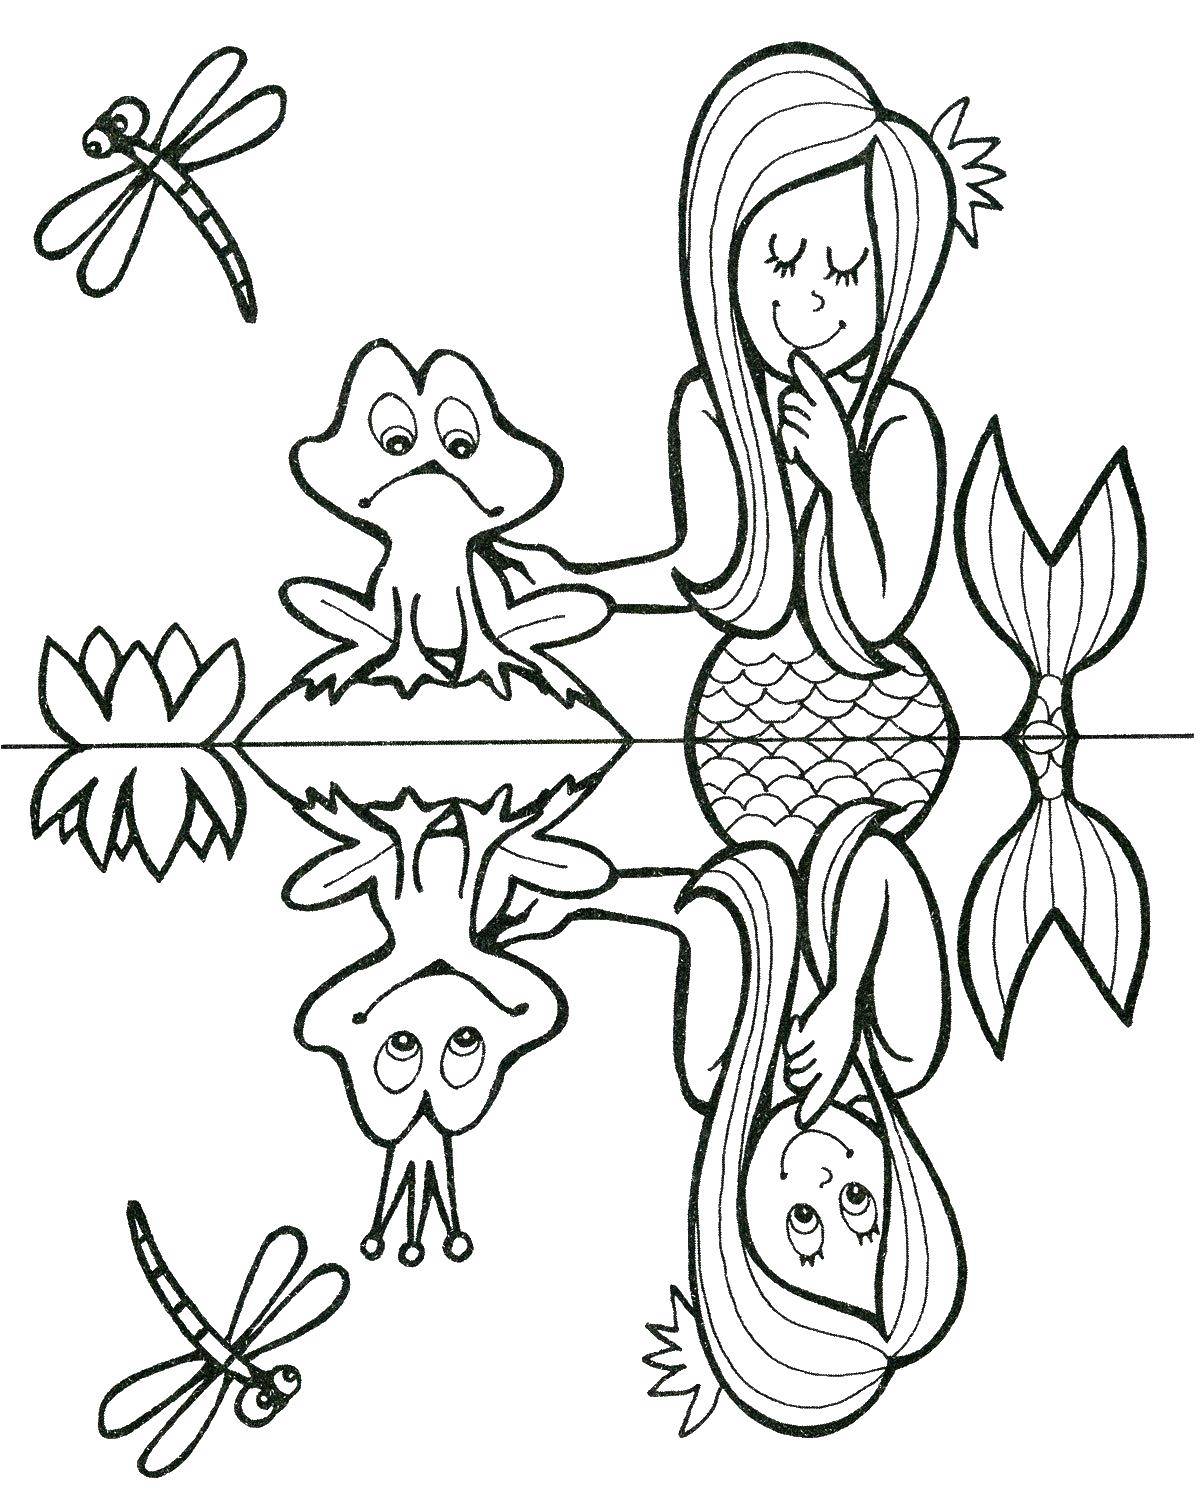 Coloring Mermaid and the frog. Category The little mermaid. Tags:  mermaid, frog, dragonfly.